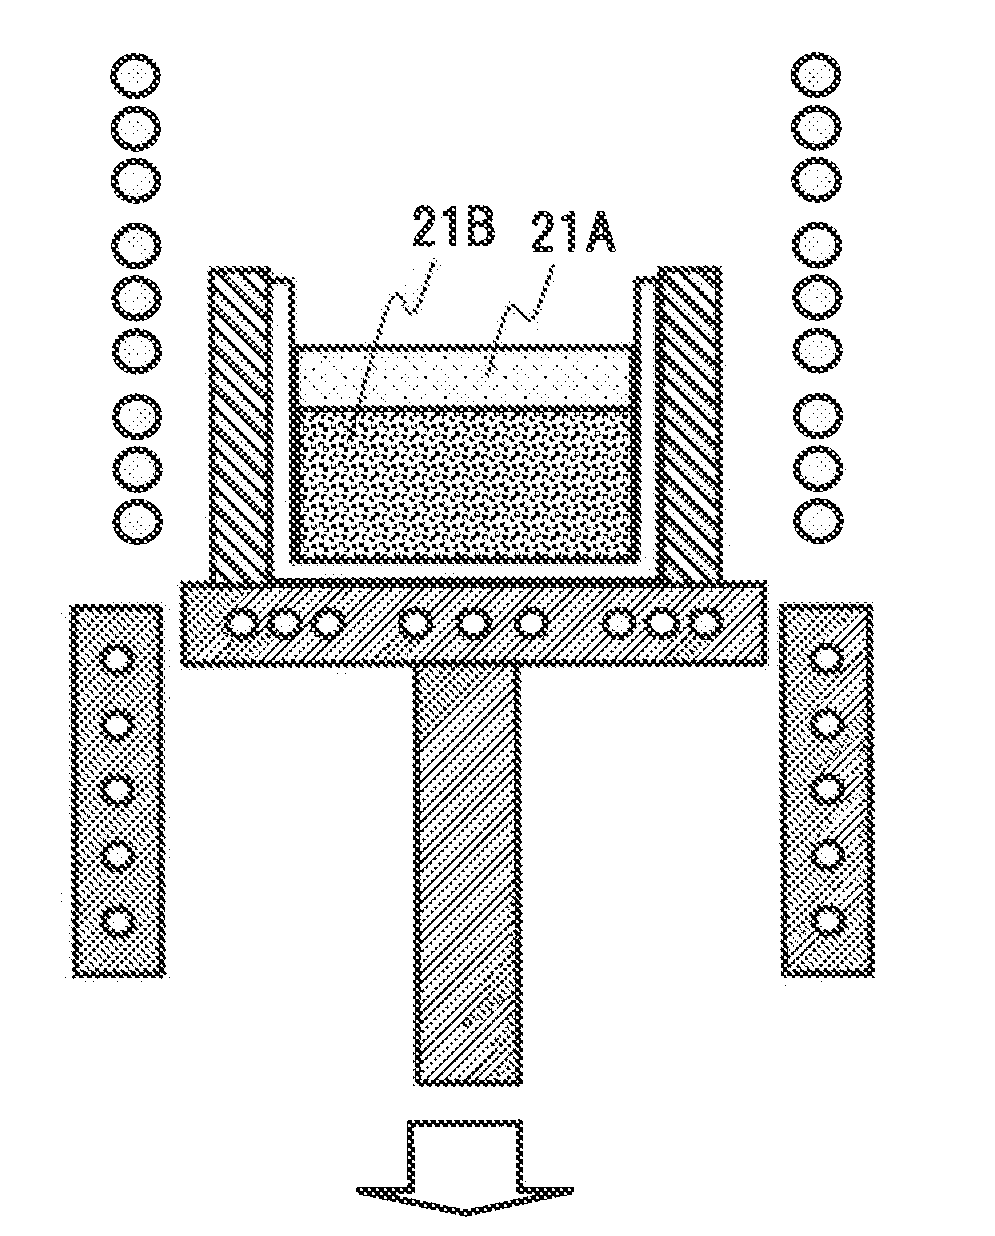 Polycrystalline silicon substrate for magnetic recording media, and magnetic recording medium